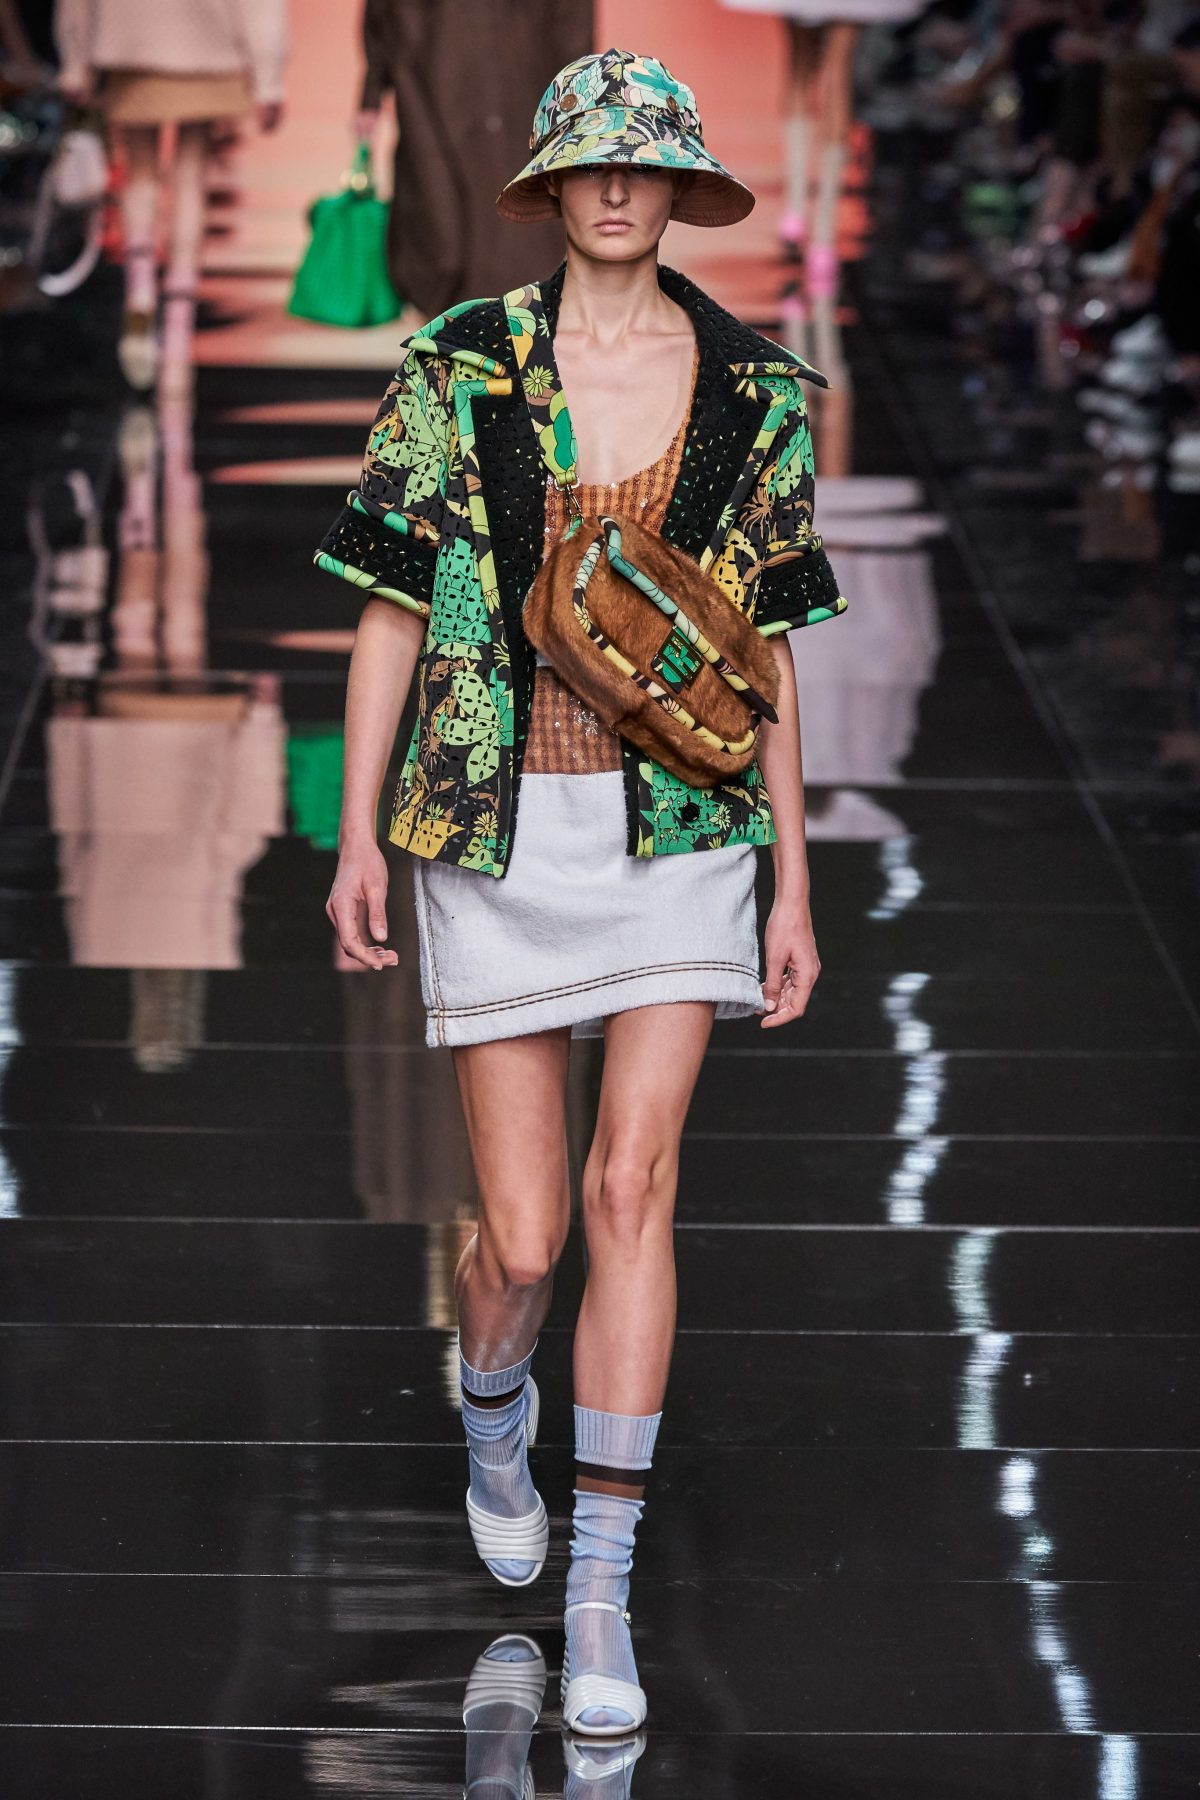 Fendi Spring 2020 Runway Bag Collection featuring 70s Printed